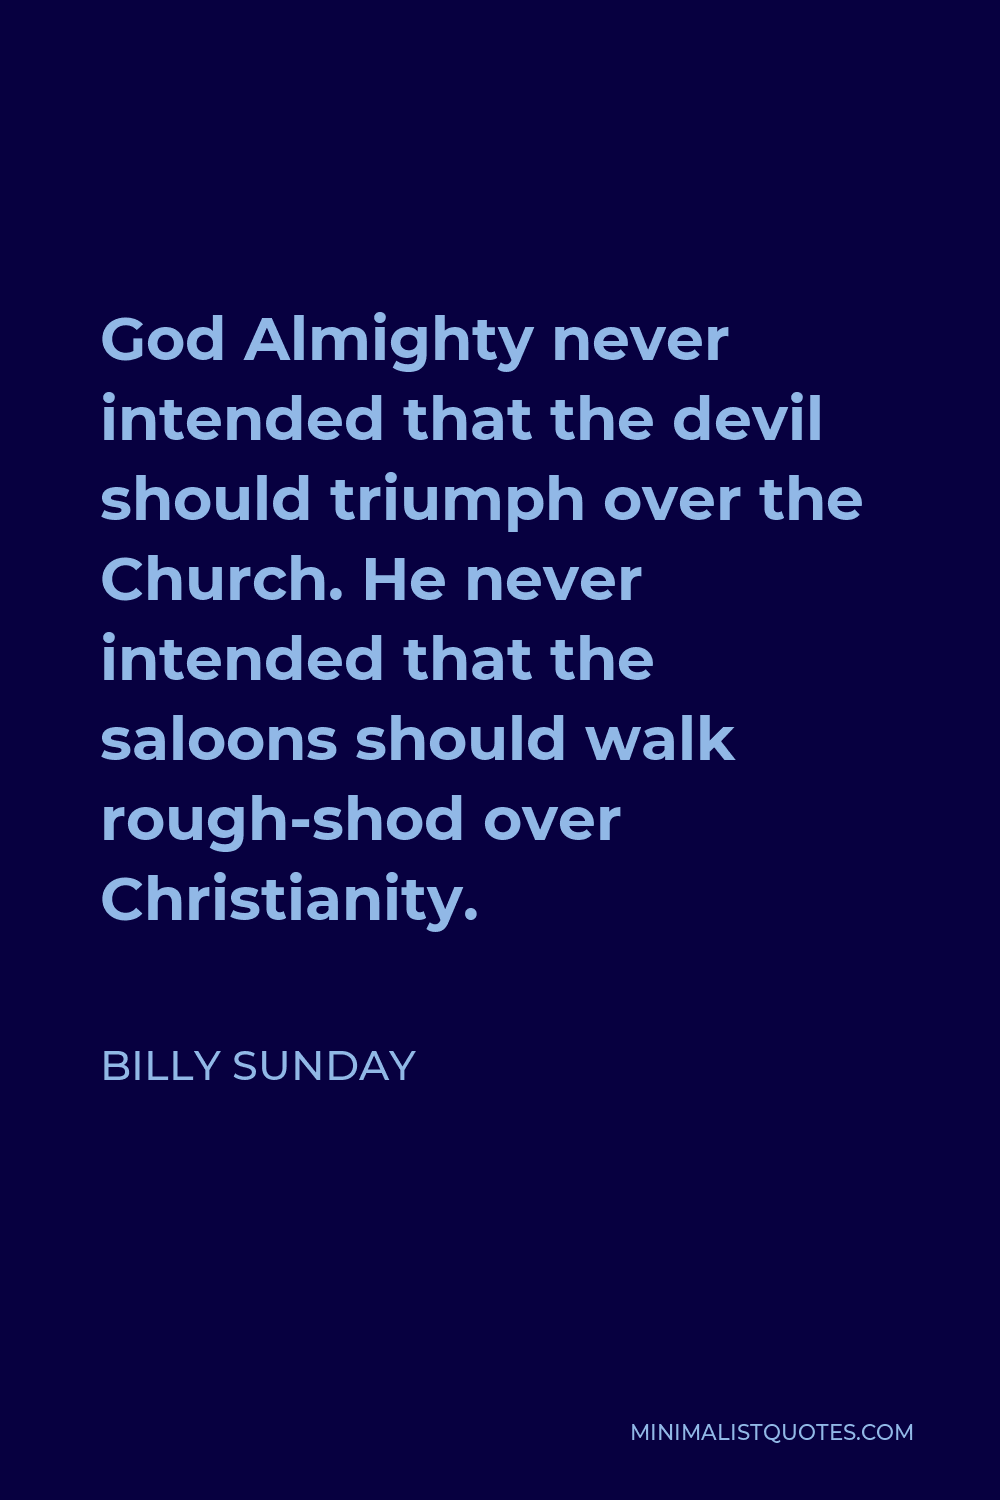 Billy Sunday Quote - God Almighty never intended that the devil should triumph over the Church. He never intended that the saloons should walk rough-shod over Christianity.